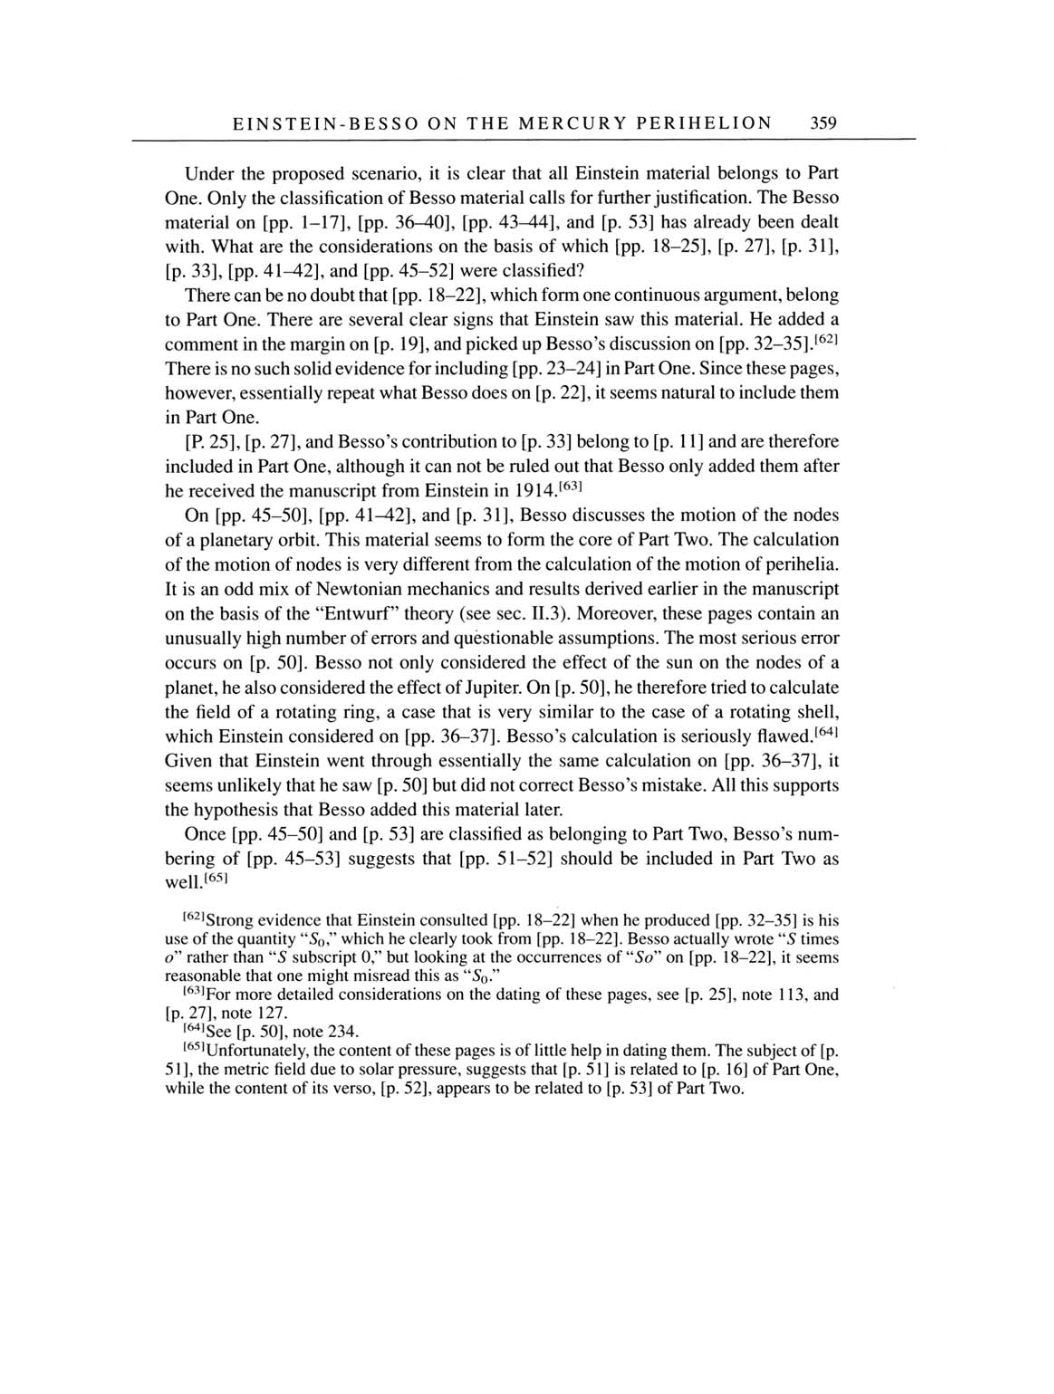 Volume 4: The Swiss Years: Writings 1912-1914 page 359